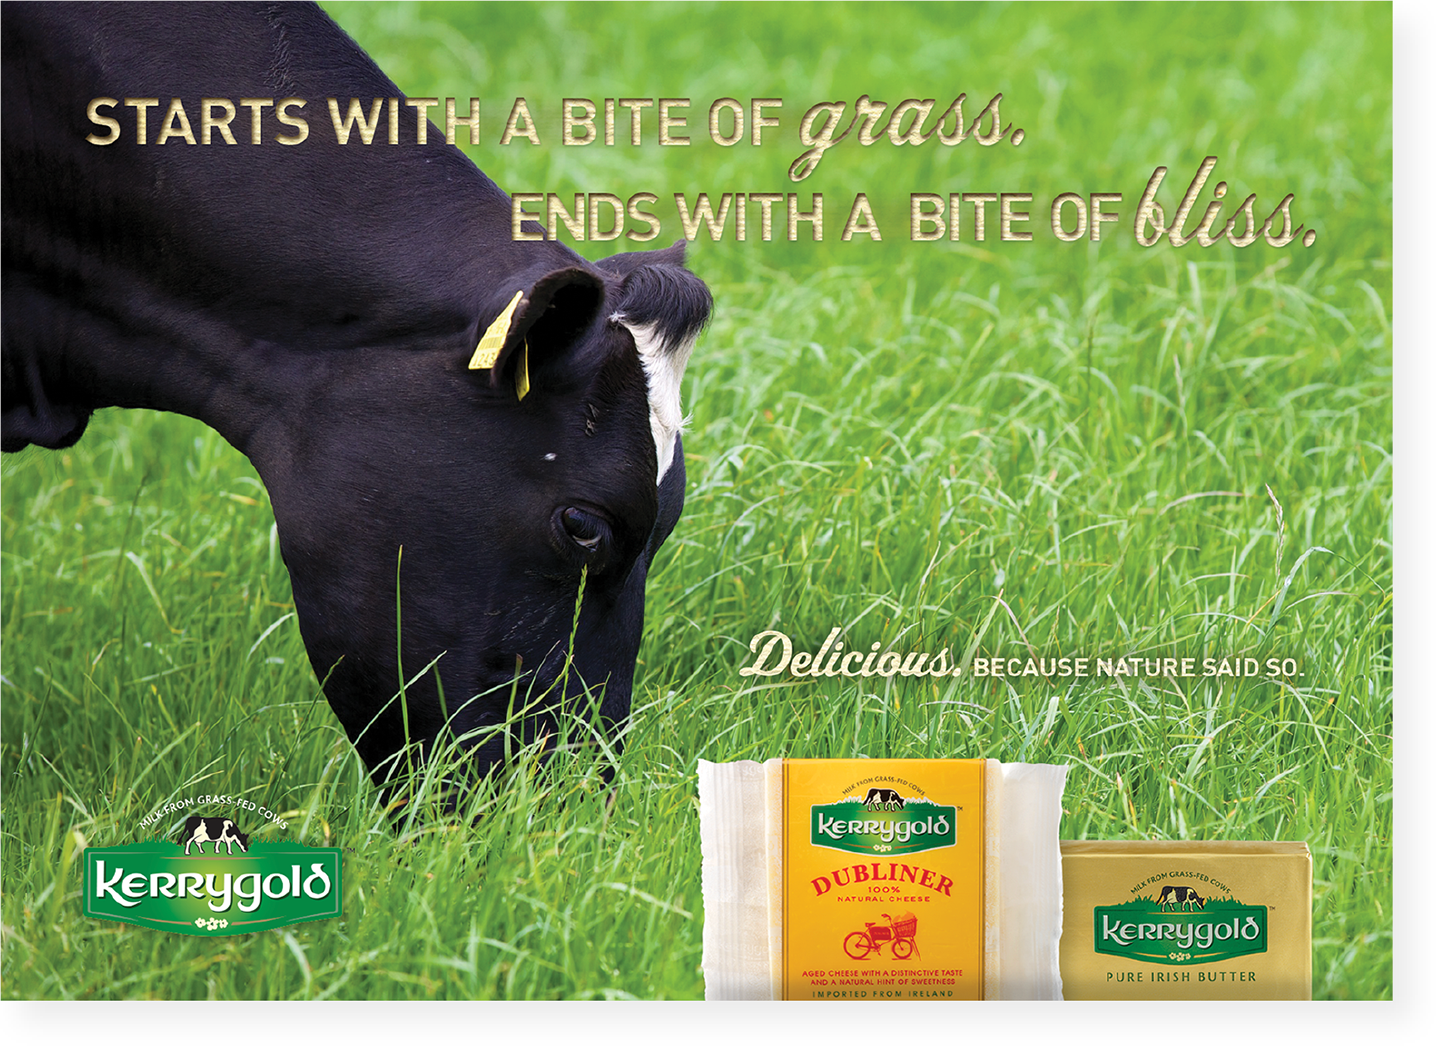 kerrygold-starts-with-a-bite-of-grass-